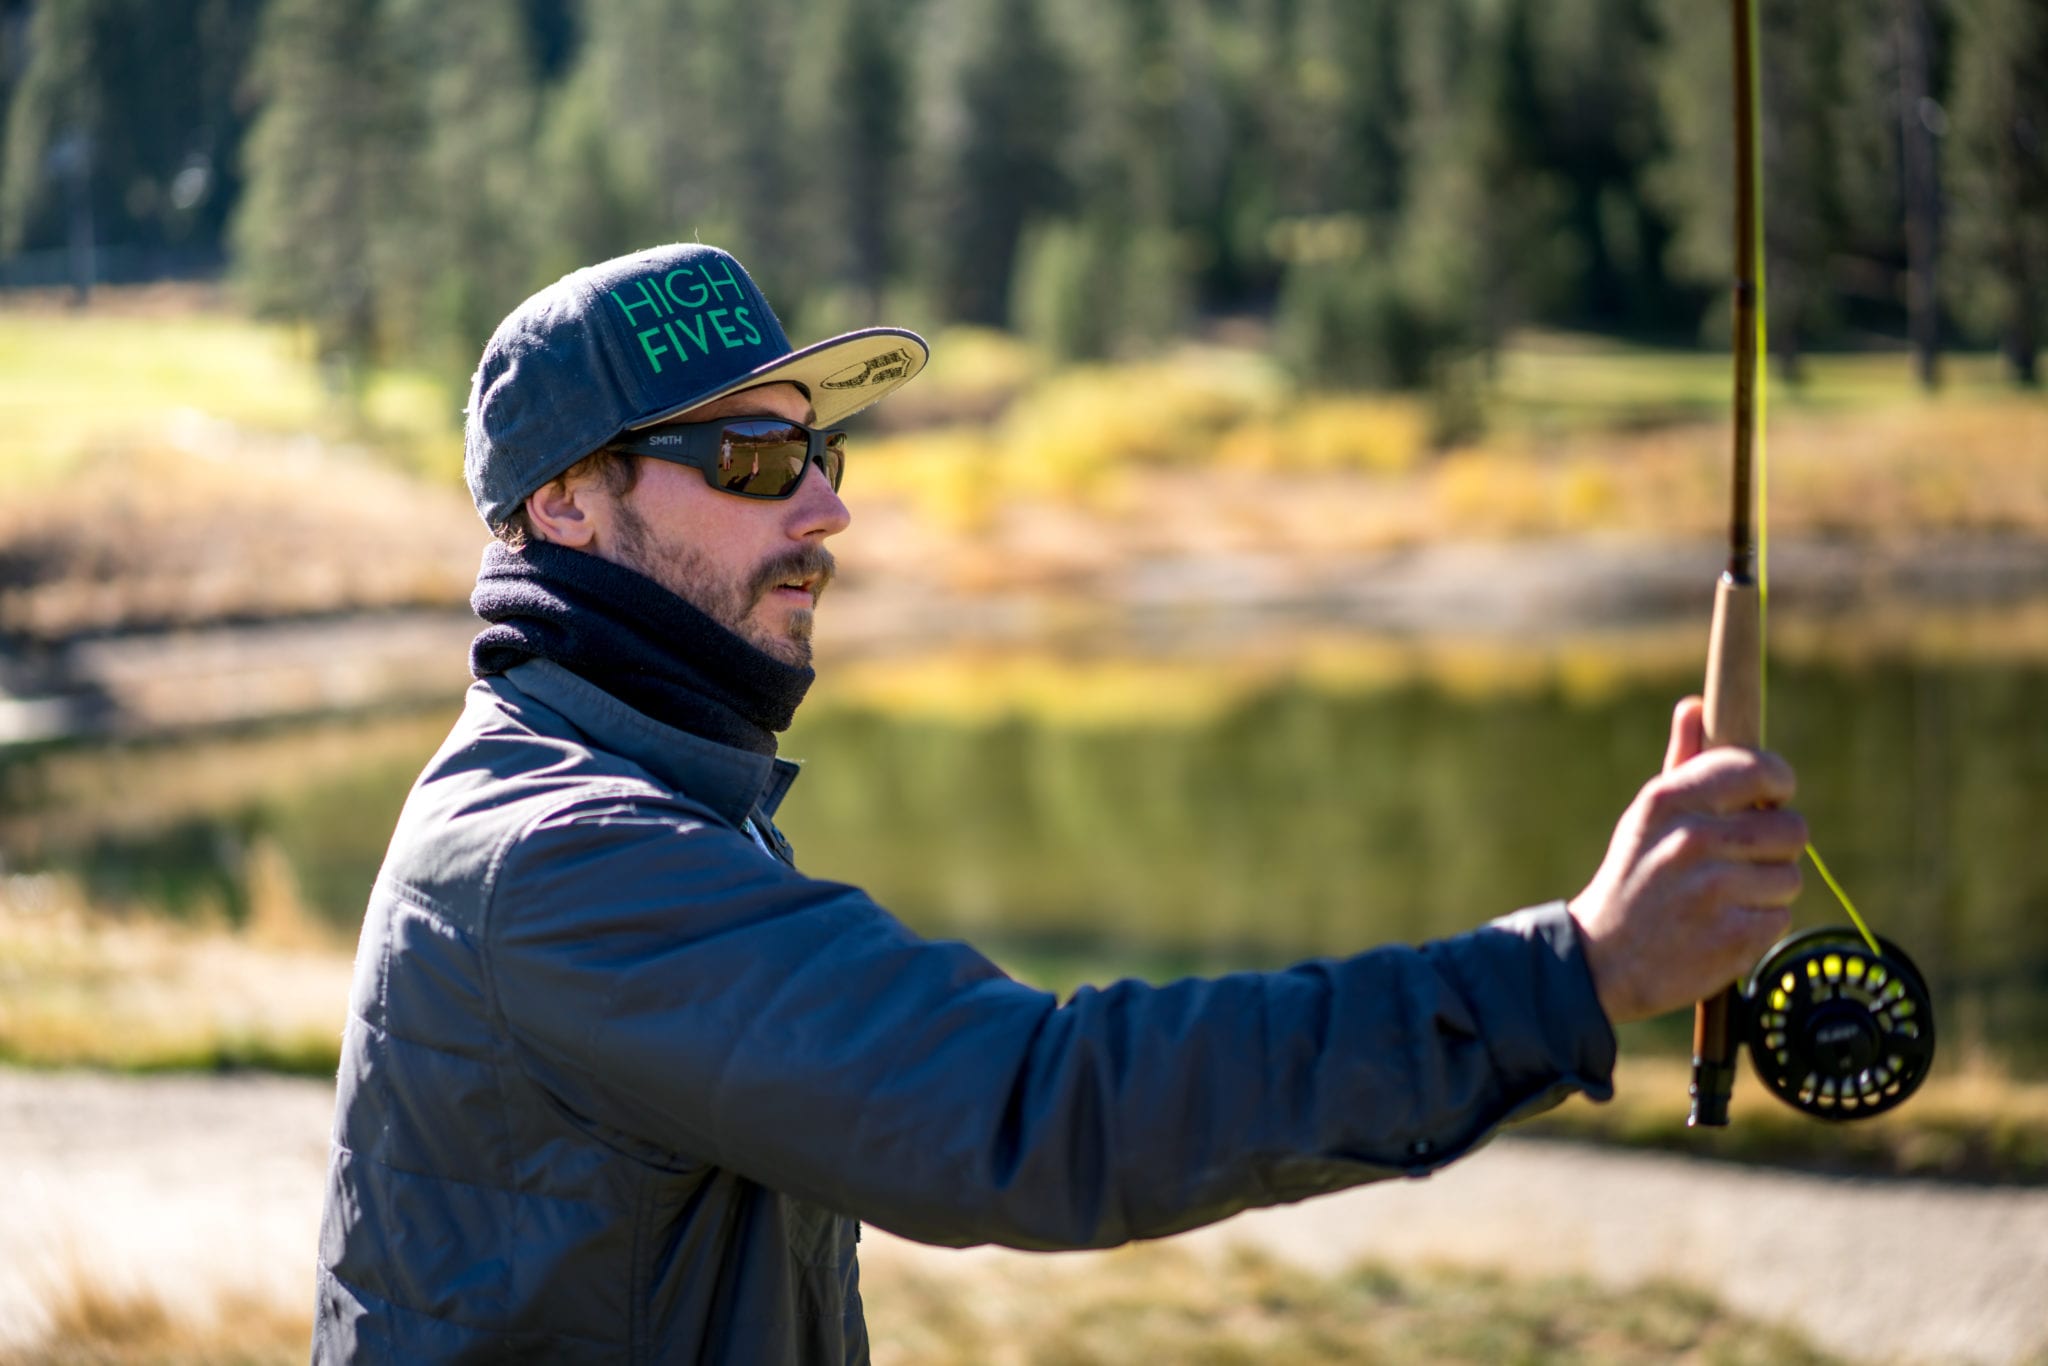 High Fives Truckee Fly Fishing 2018 5MB-16